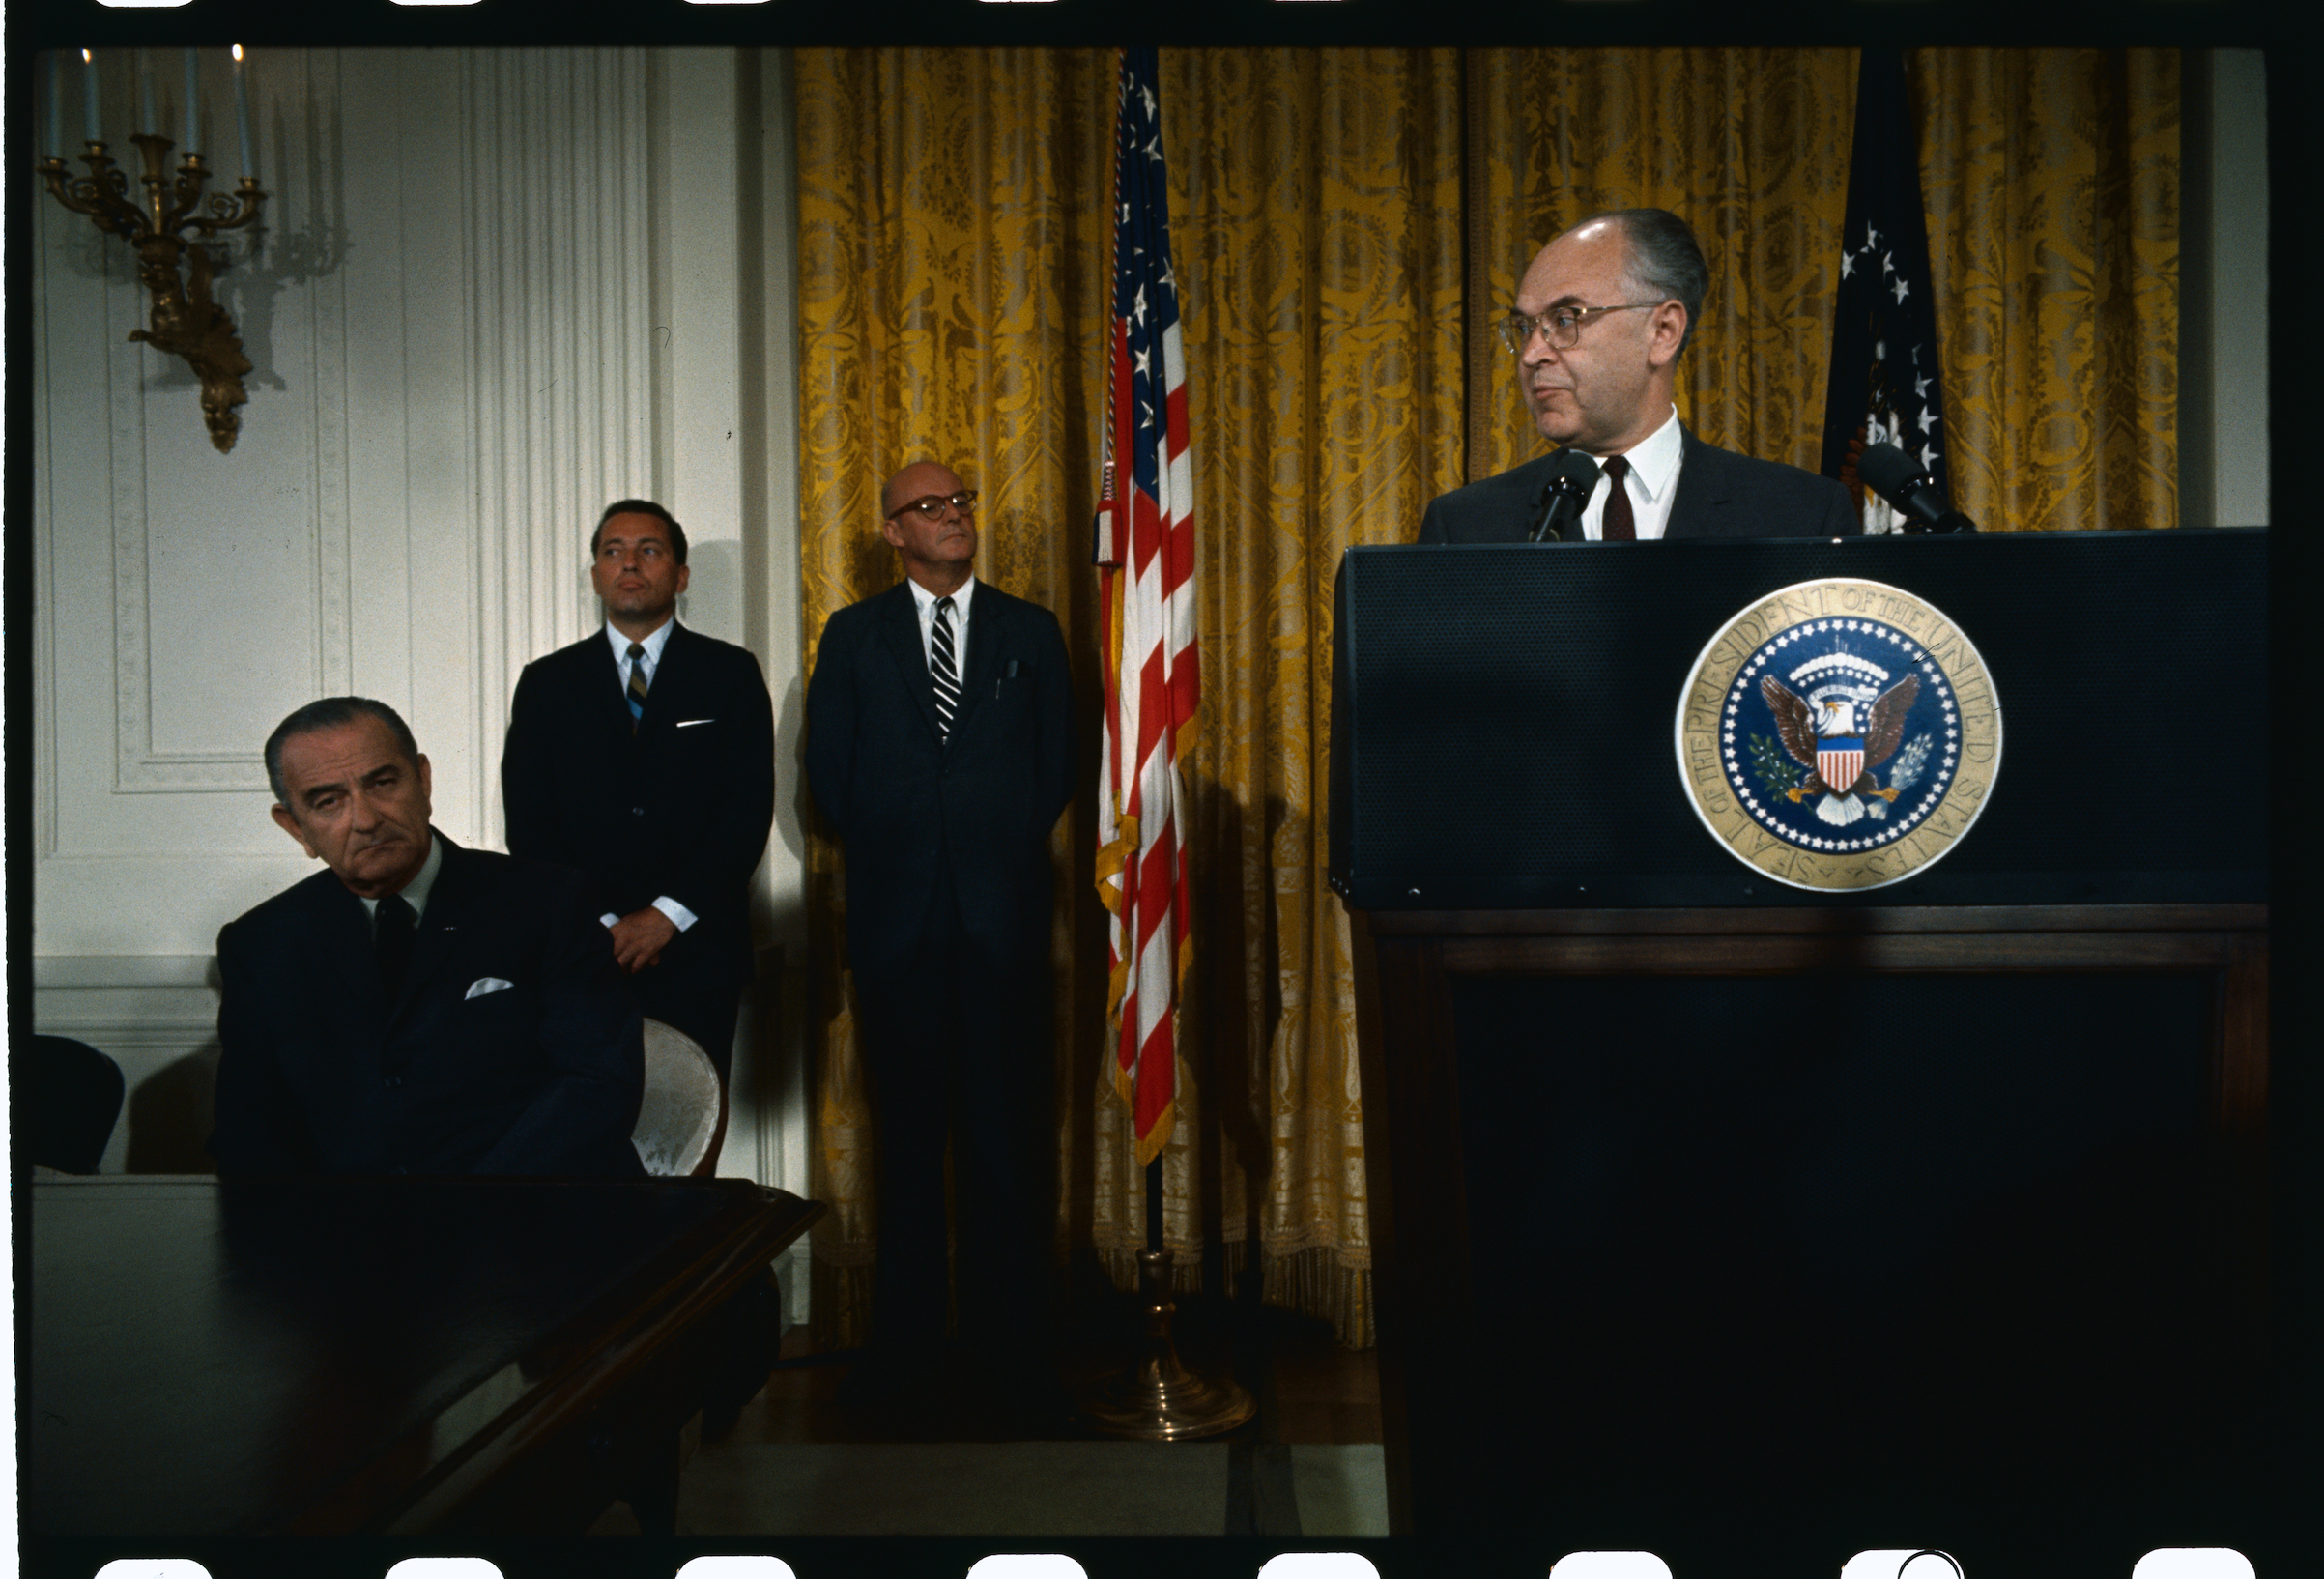 Soviet Ambassador Anatoly Dobrynin, speaking during the signing of the nuclear nonproliferation treaty in the White House, in 1968. (Bettmann/Getty Images)